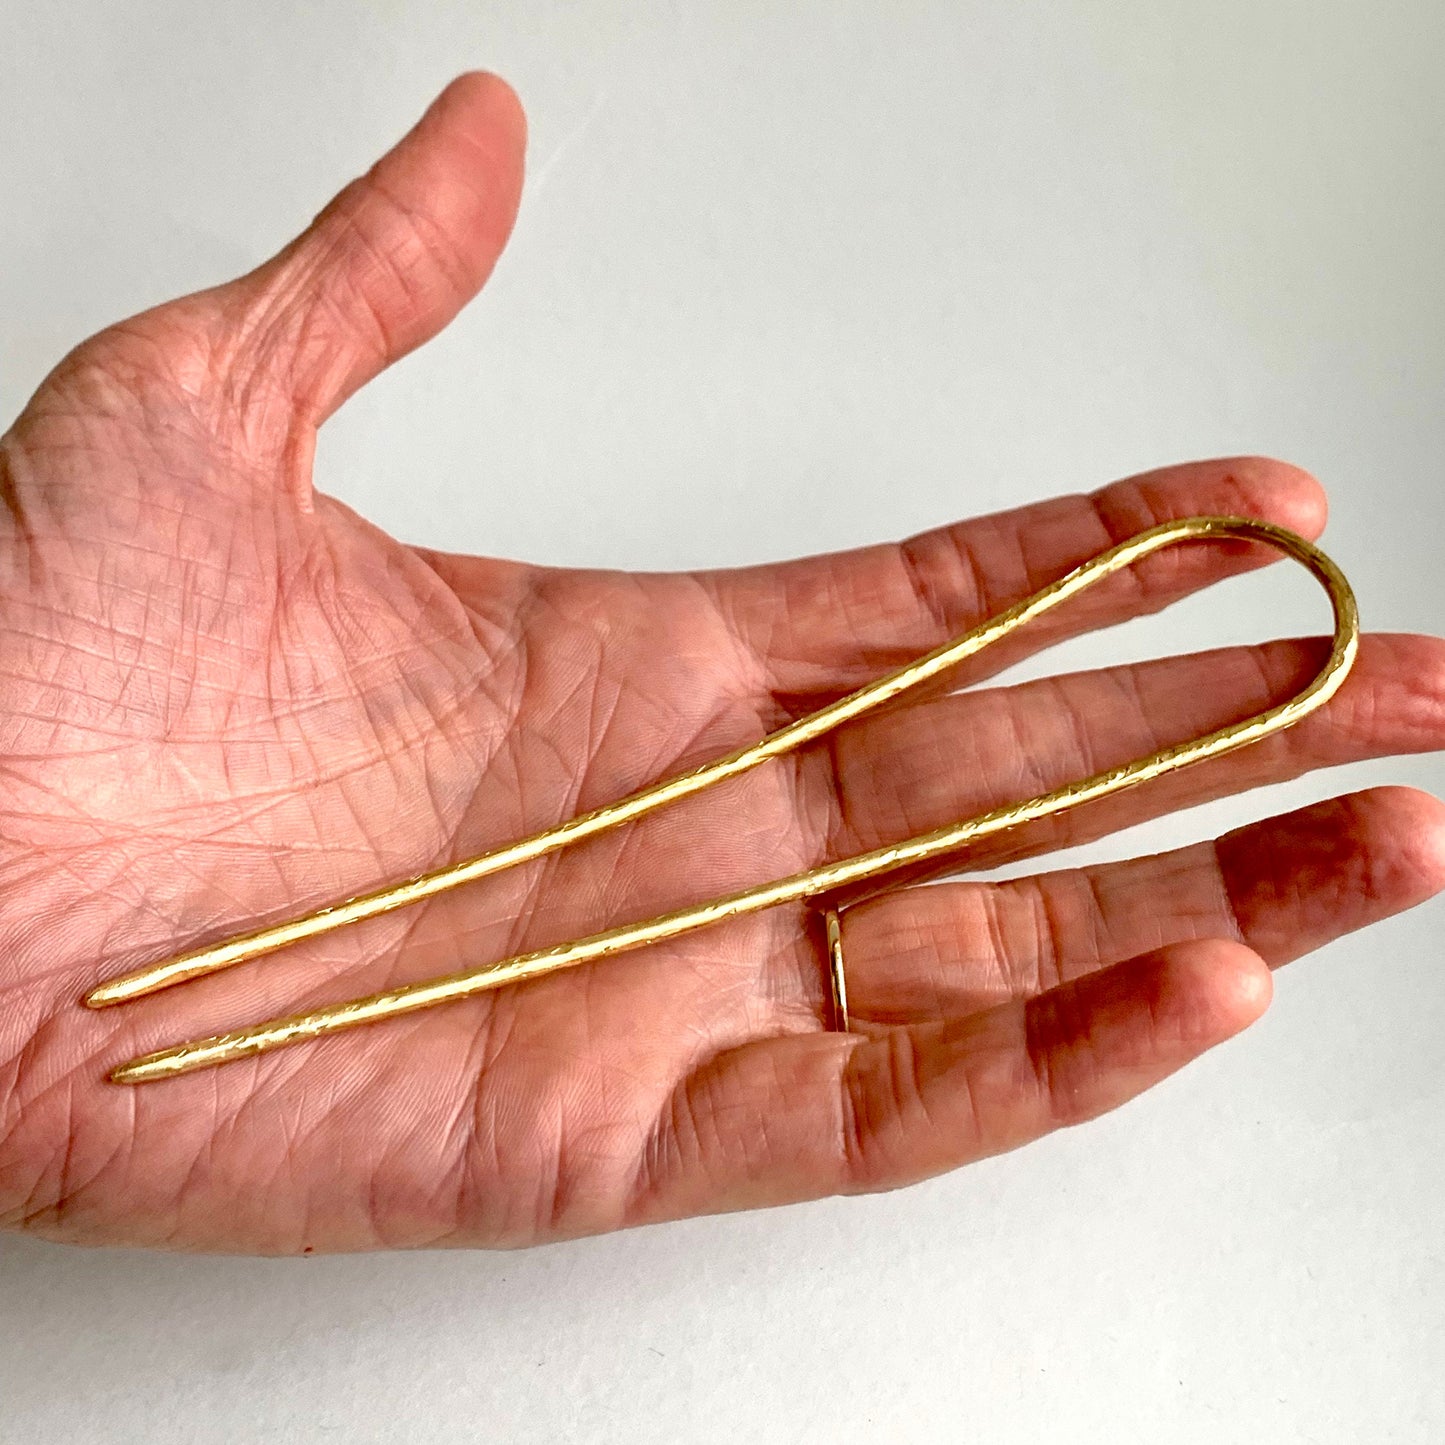 Brass hair pin - minimalist accessory for long hair - handmade brass pin to keep hair in a bun - creative simple and sturdy hair pin for her